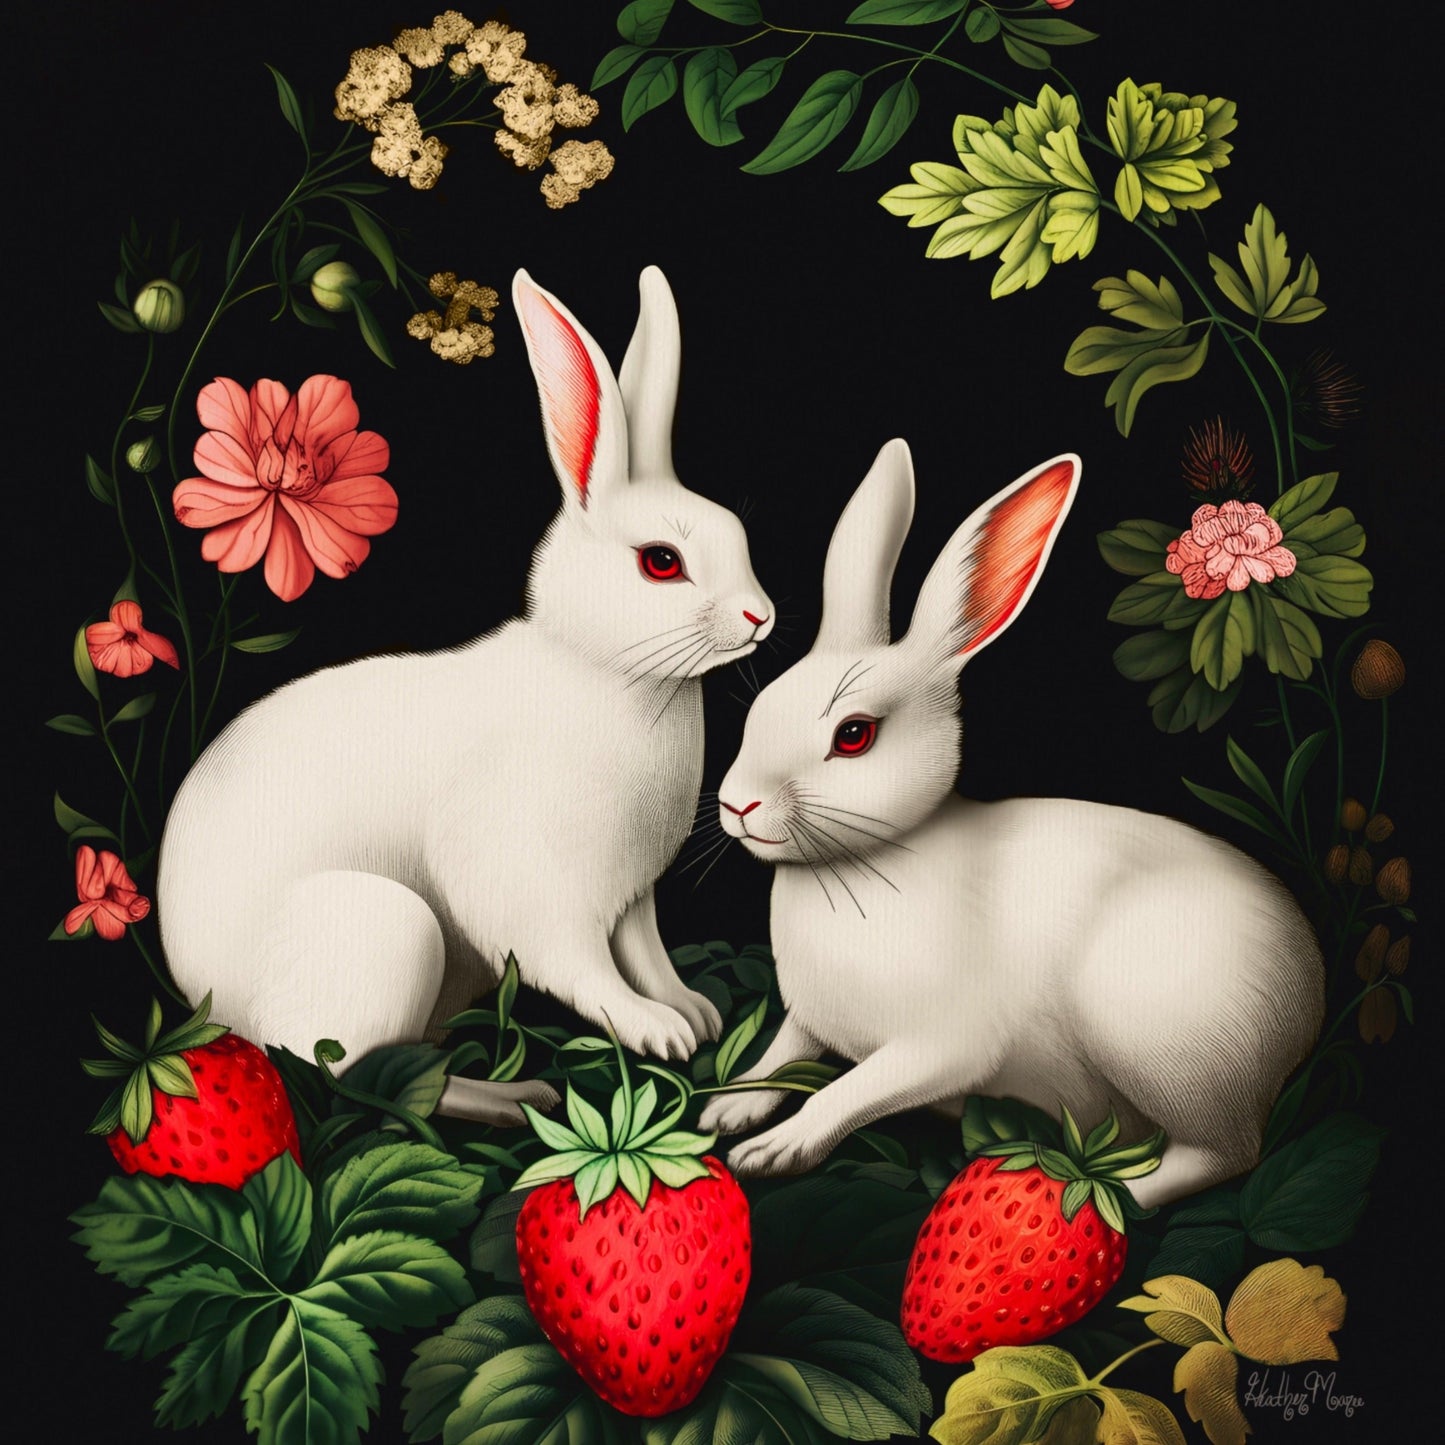 A Pair of Albino Bunnies with Berries